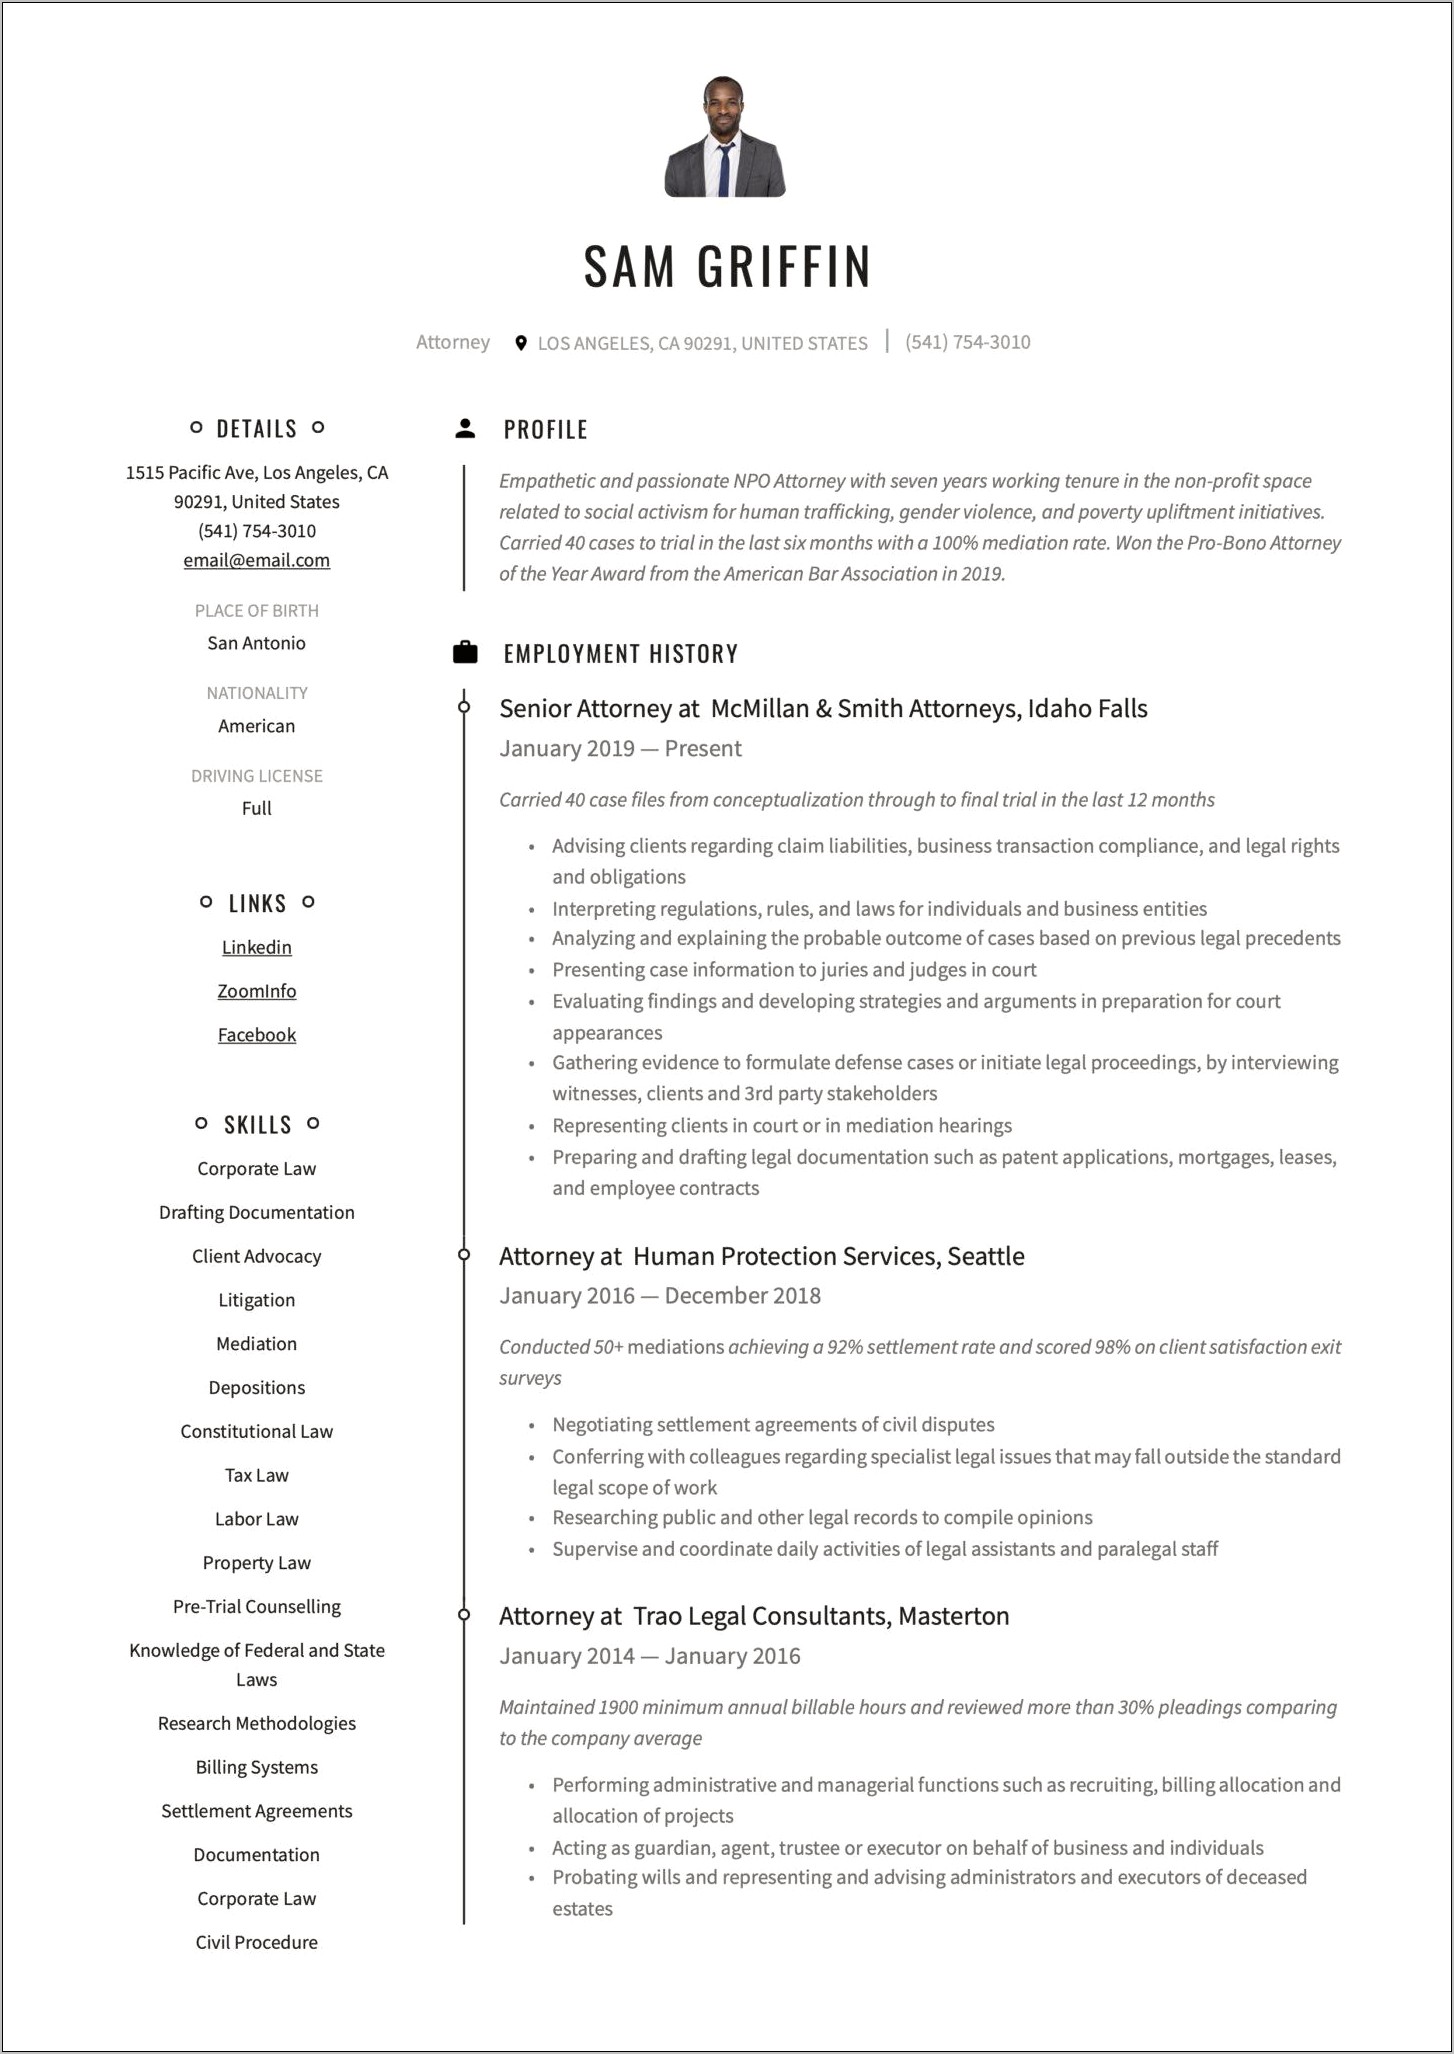 Sample Legal Resumes Corporate Attorney